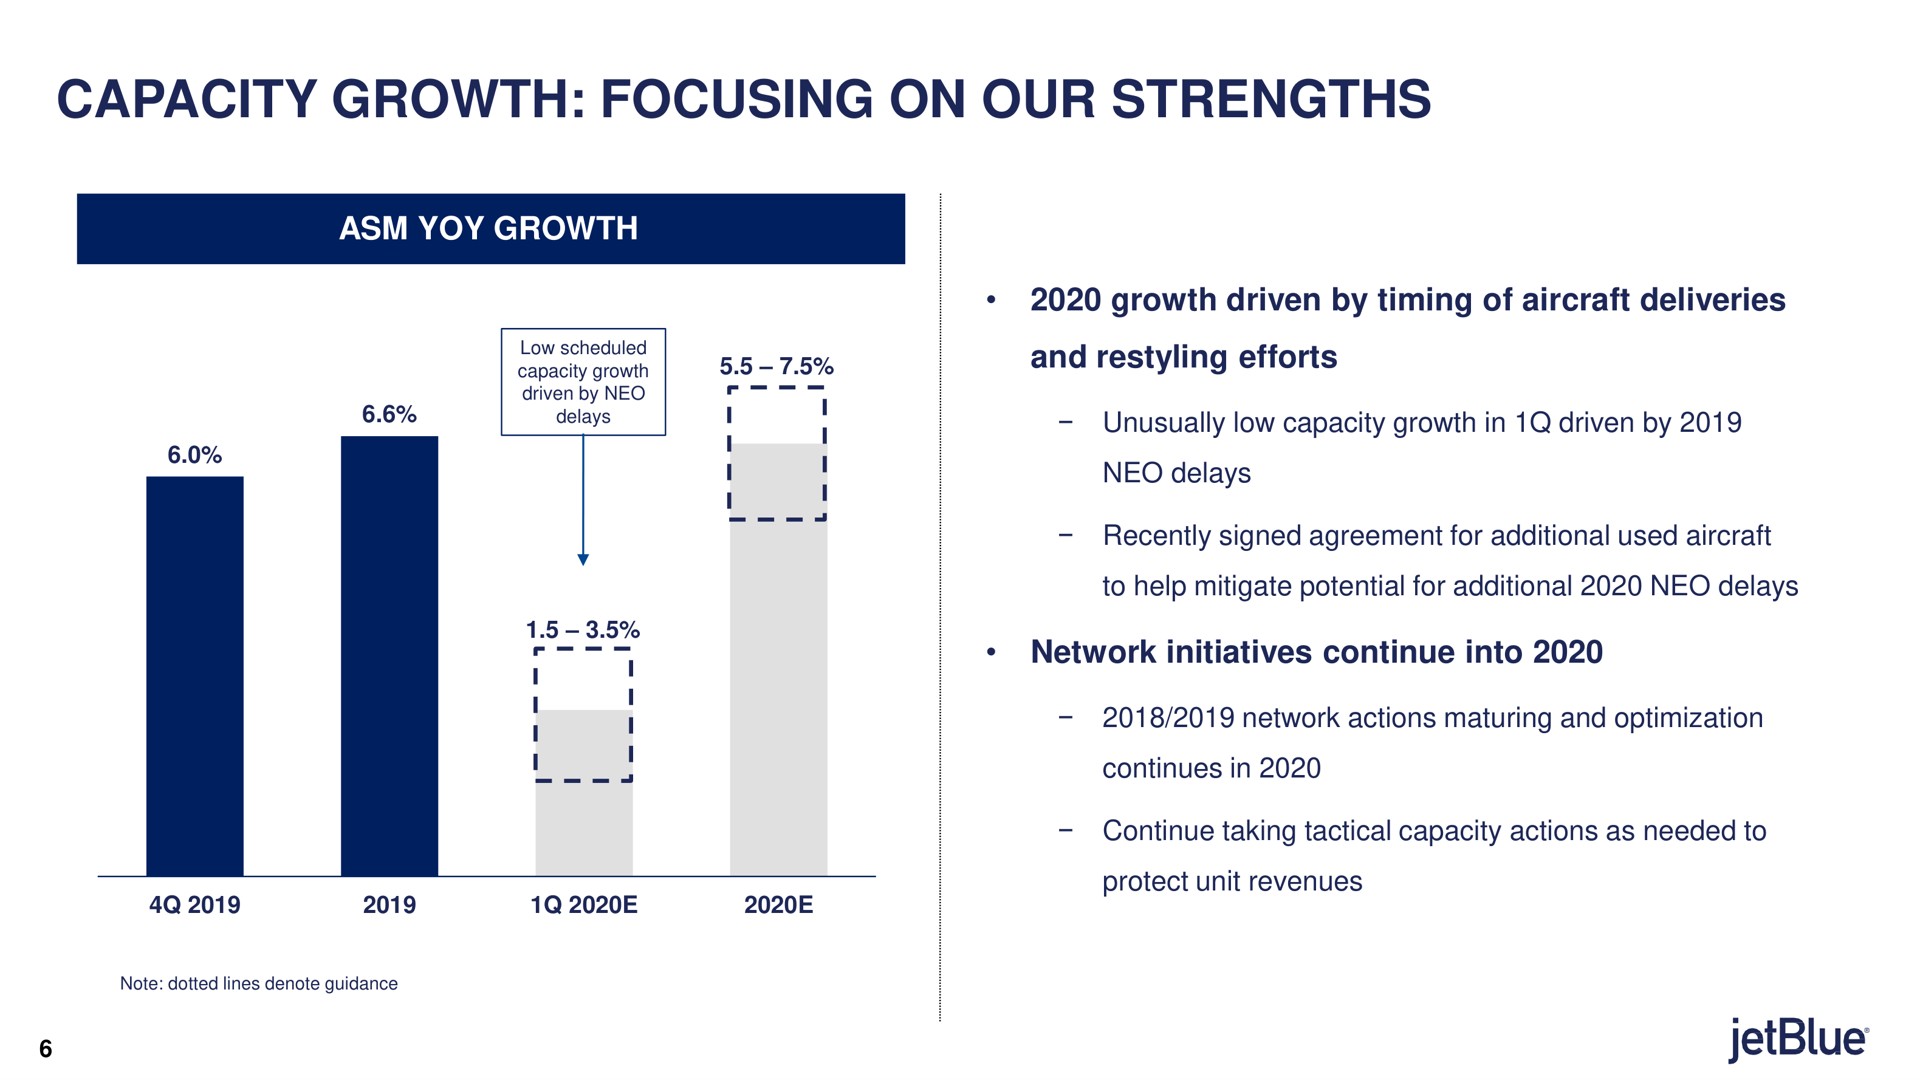 capacity growth focusing on our strengths yoy growth growth driven by timing of aircraft deliveries and efforts network initiatives continue into protect unit revenues | jetBlue